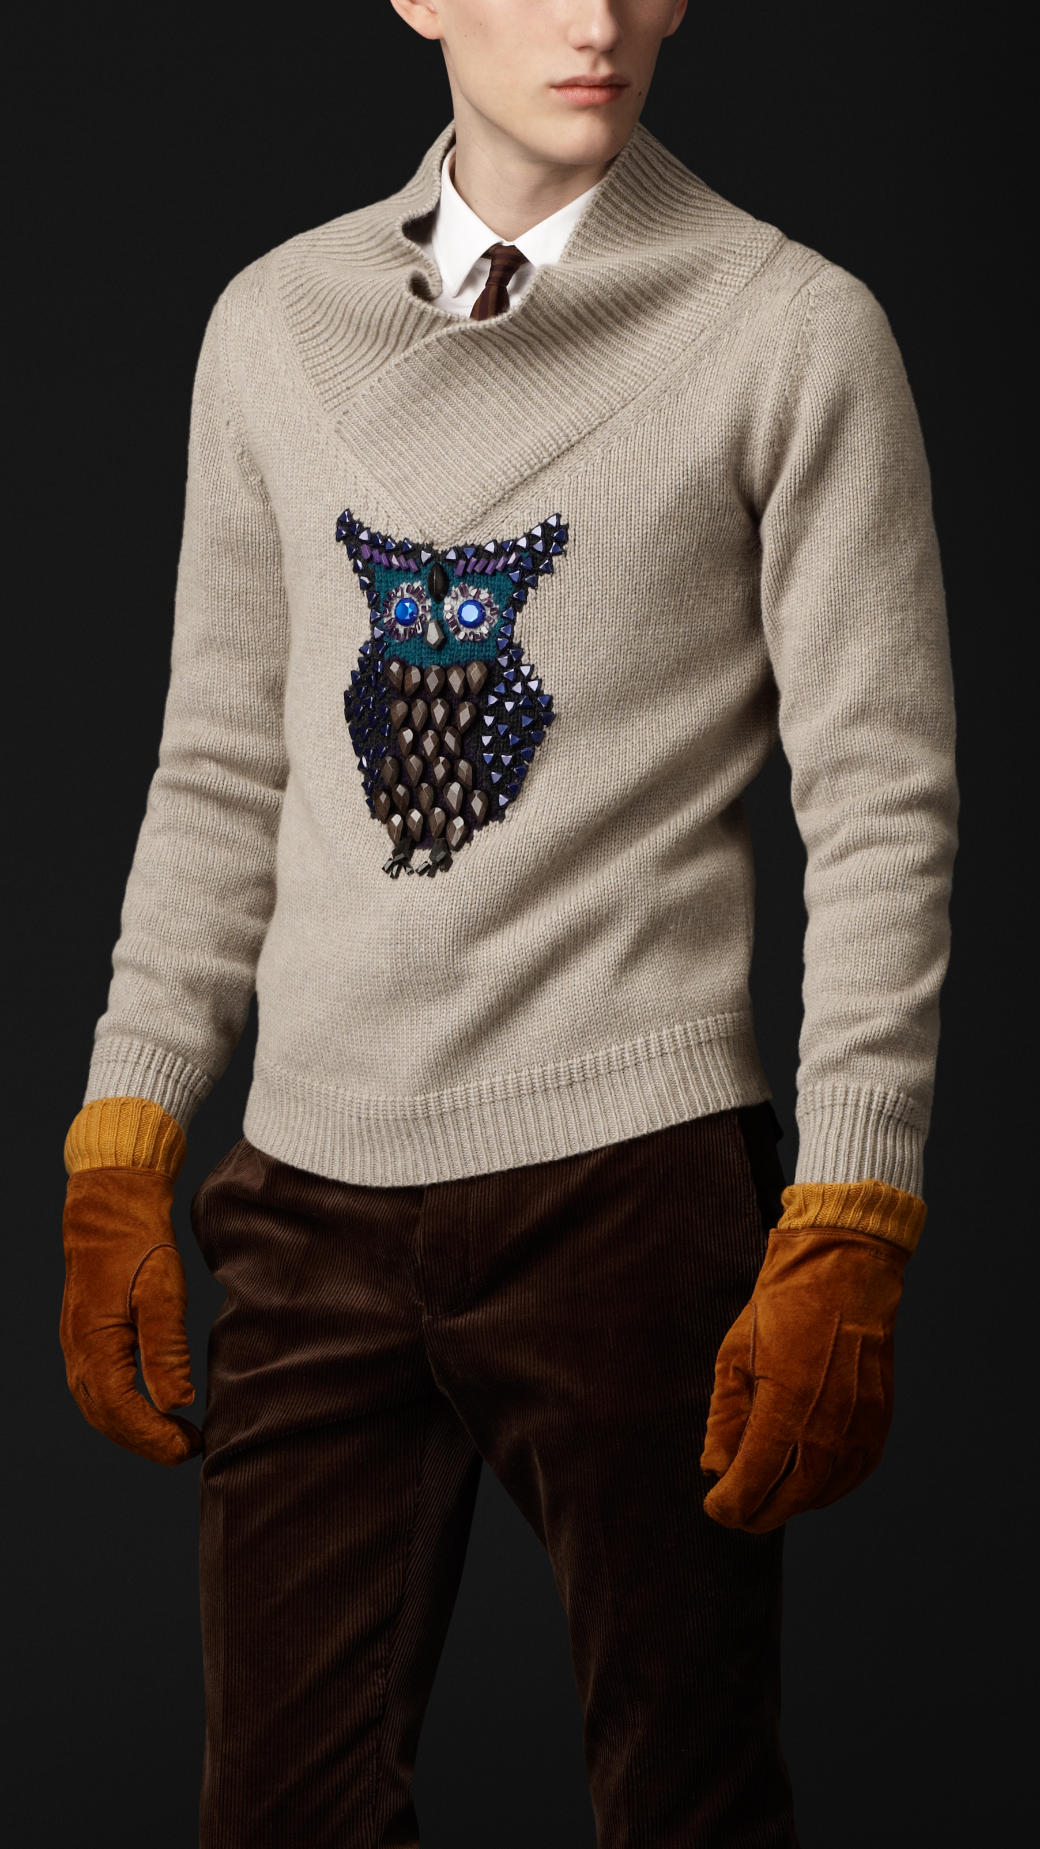 Burberry Prorsum Owl Detail Cashmere Sweater in Natural for Men - Lyst